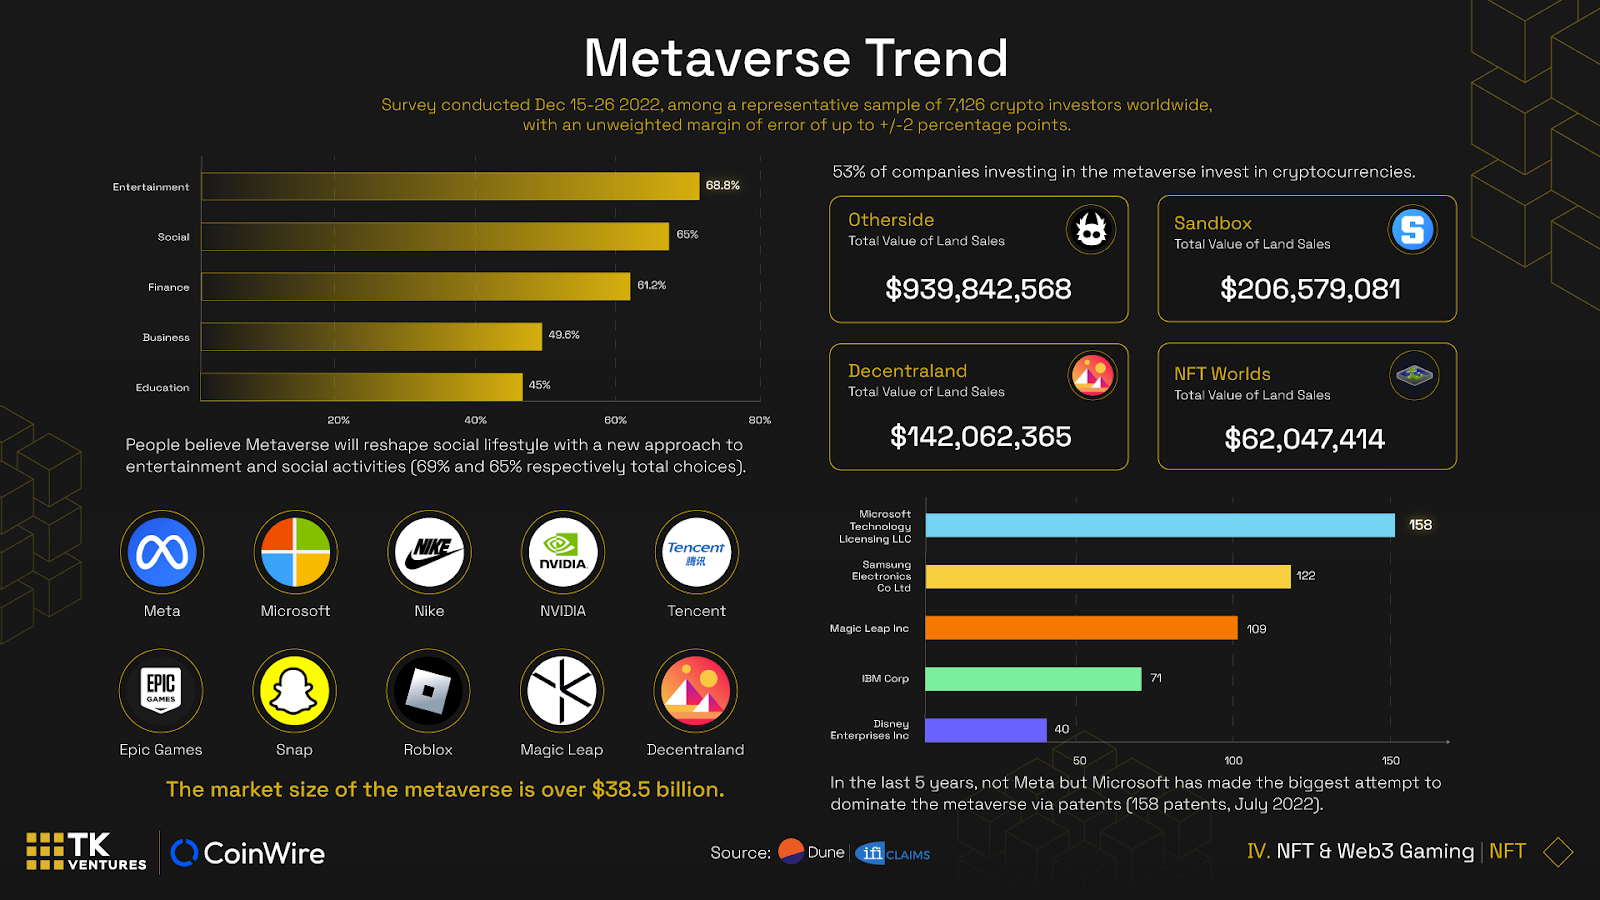  69% users bet metaverse entertainment will reshape social lifestyle: Data 